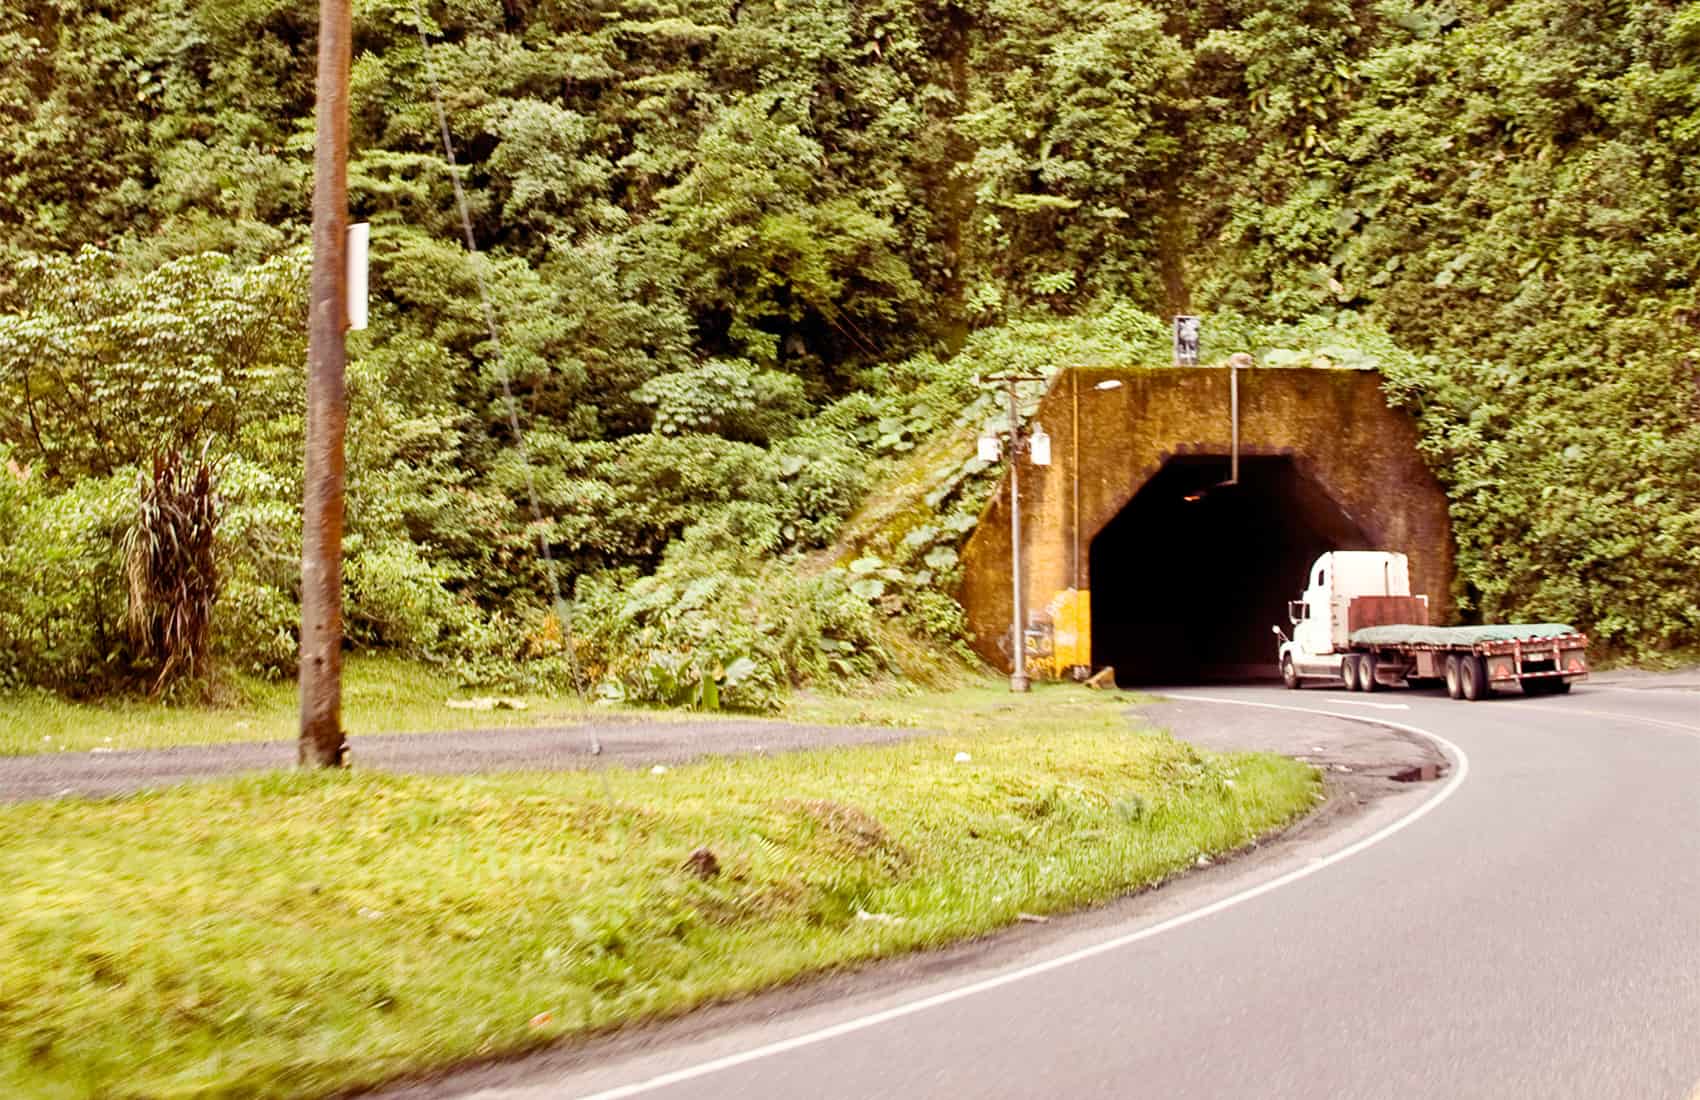 Zurquí Tunnel at Route 32